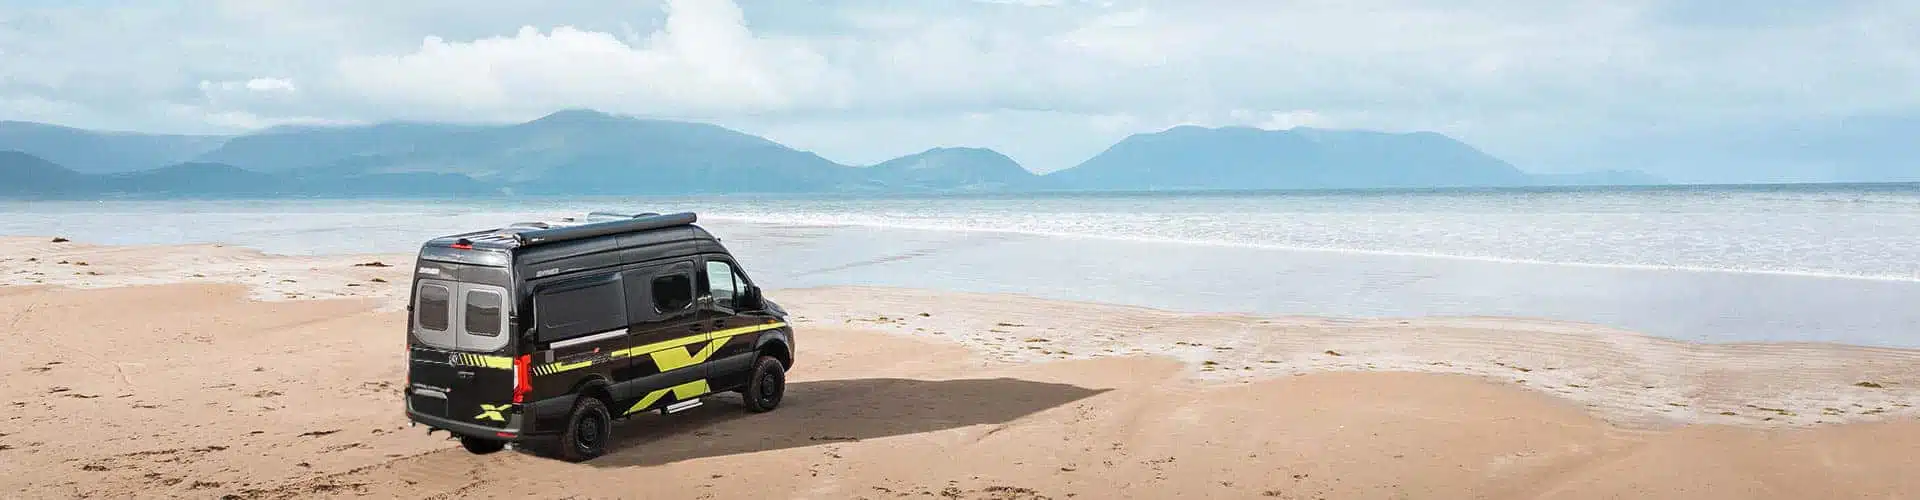 Black offroad Campervan standing on the beach at the sea with hills and clouds in the background